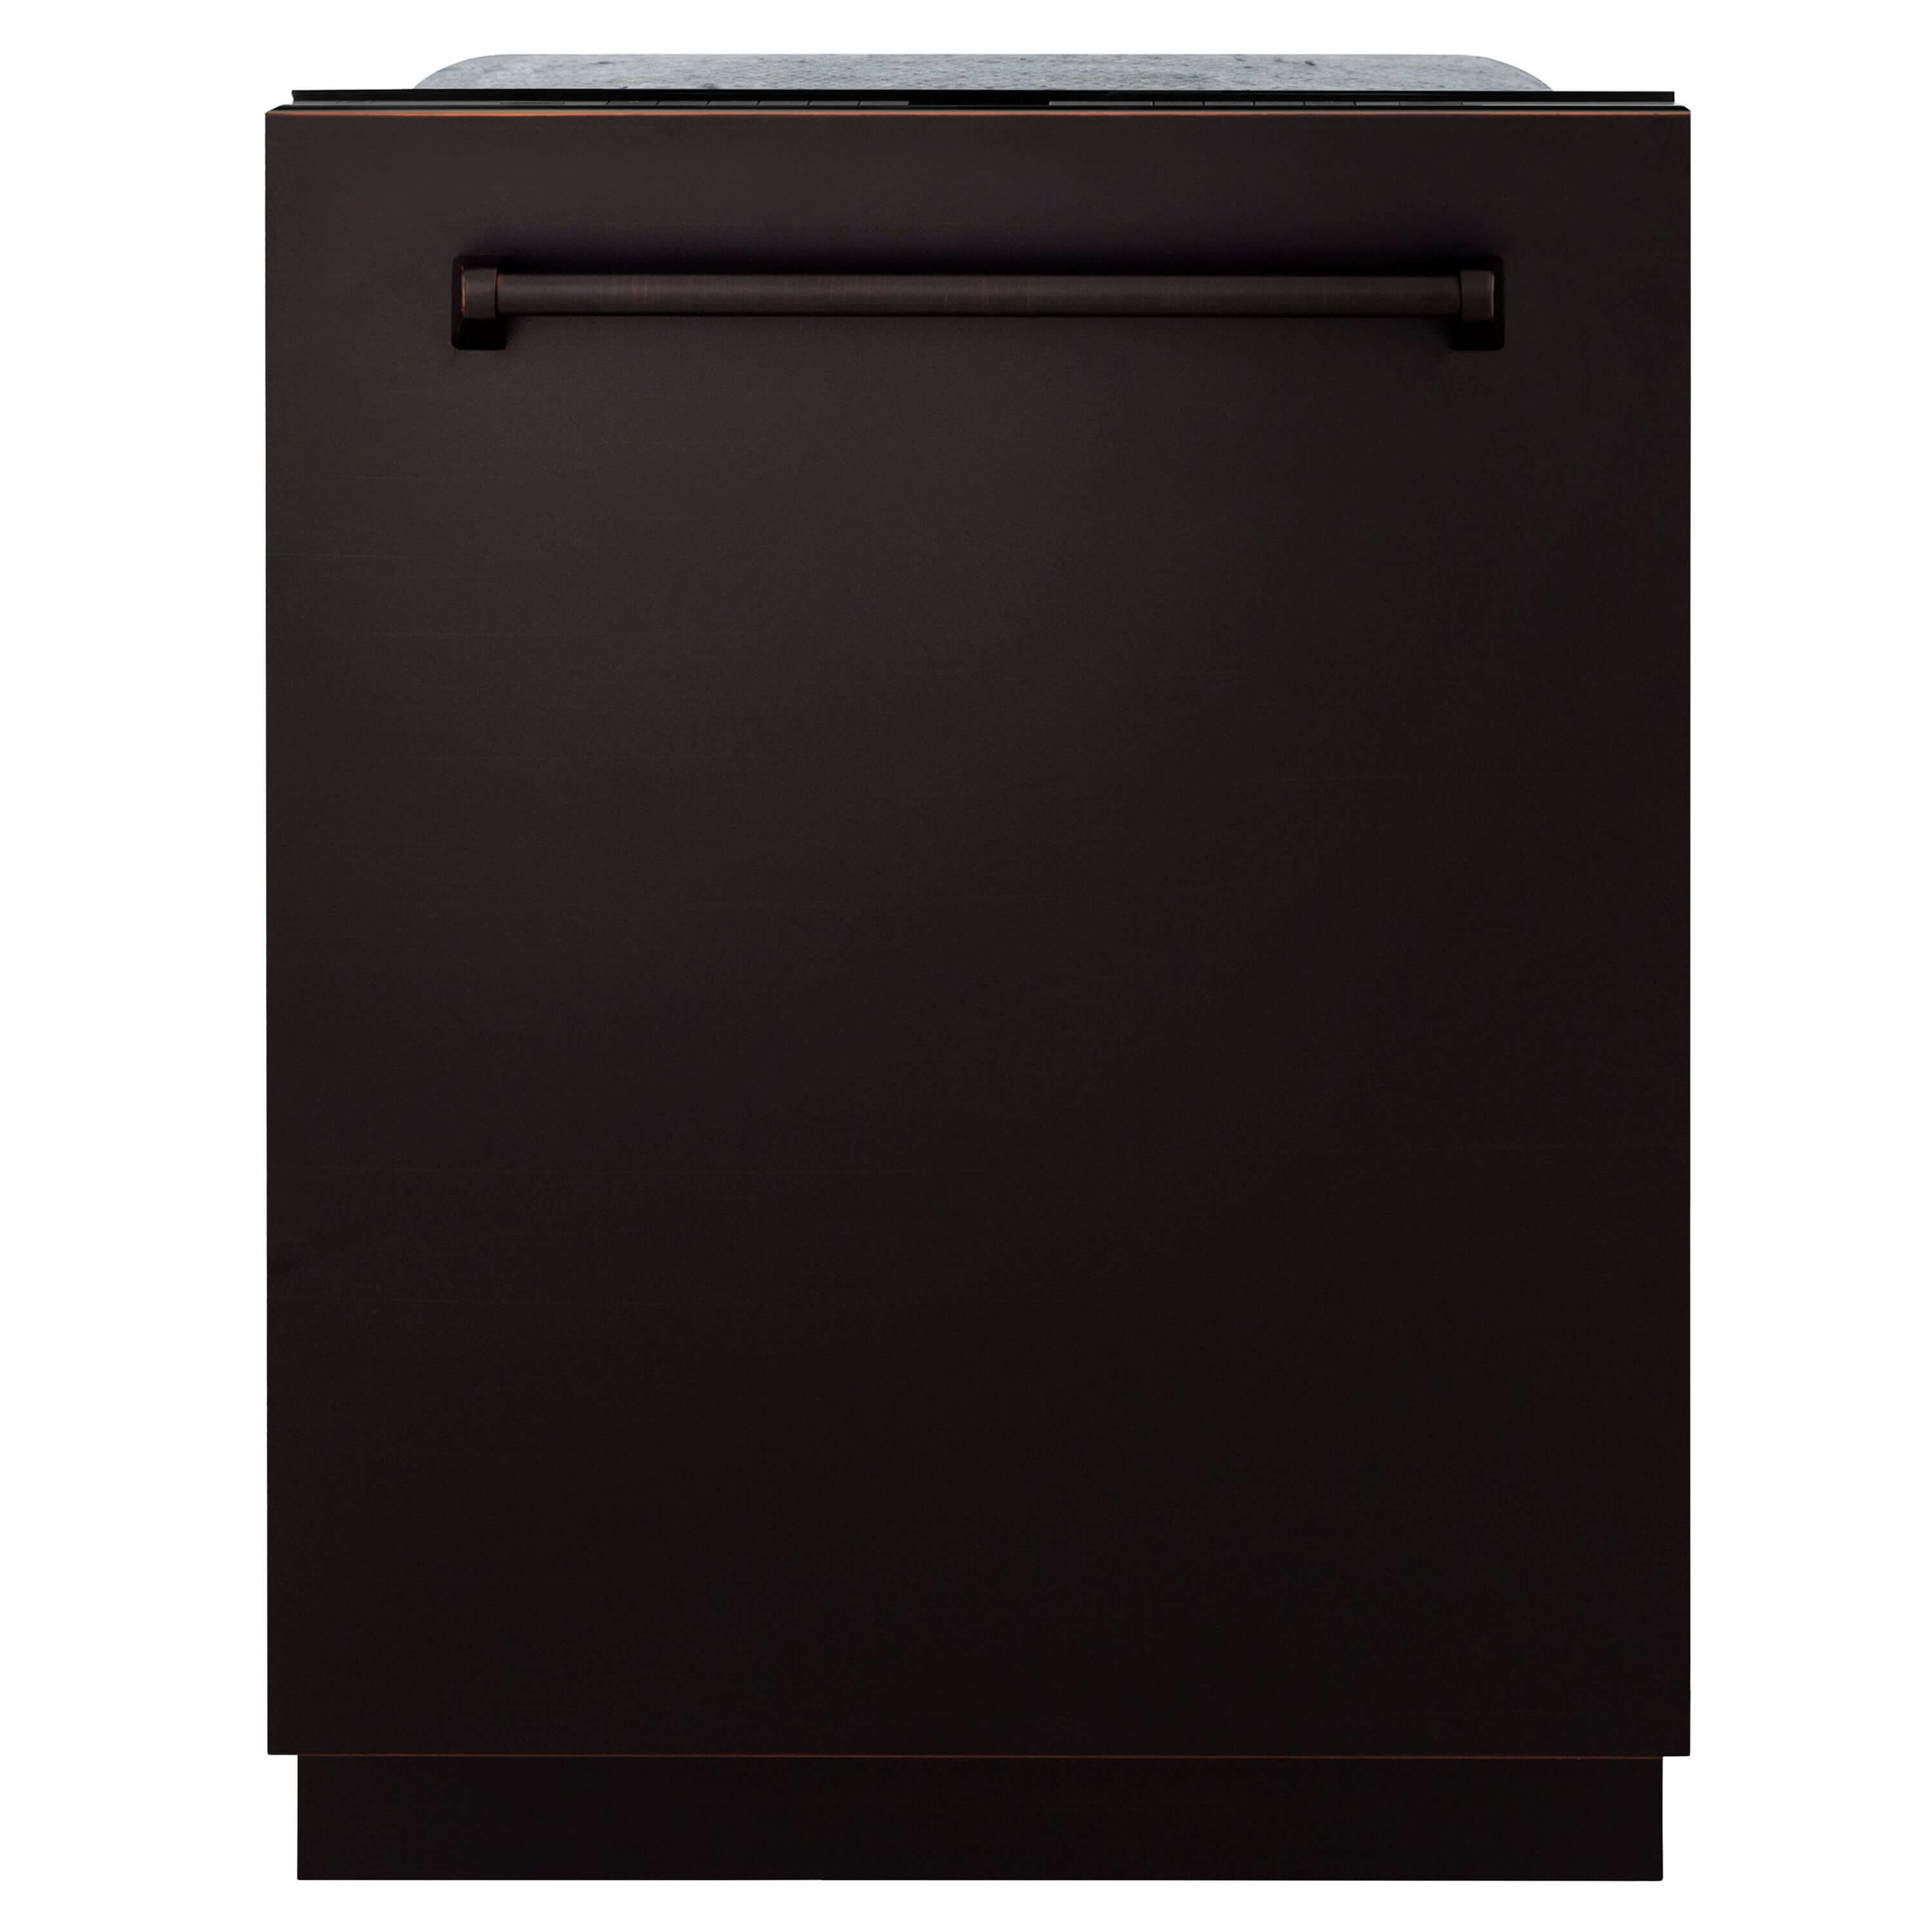 ZLINE 24 in. Panel-Included Monument Series 3rd Rack Top Touch Control Dishwasher with Oil-Rubbed Bronze Door, 45dBa (DWMT-ORB-24)